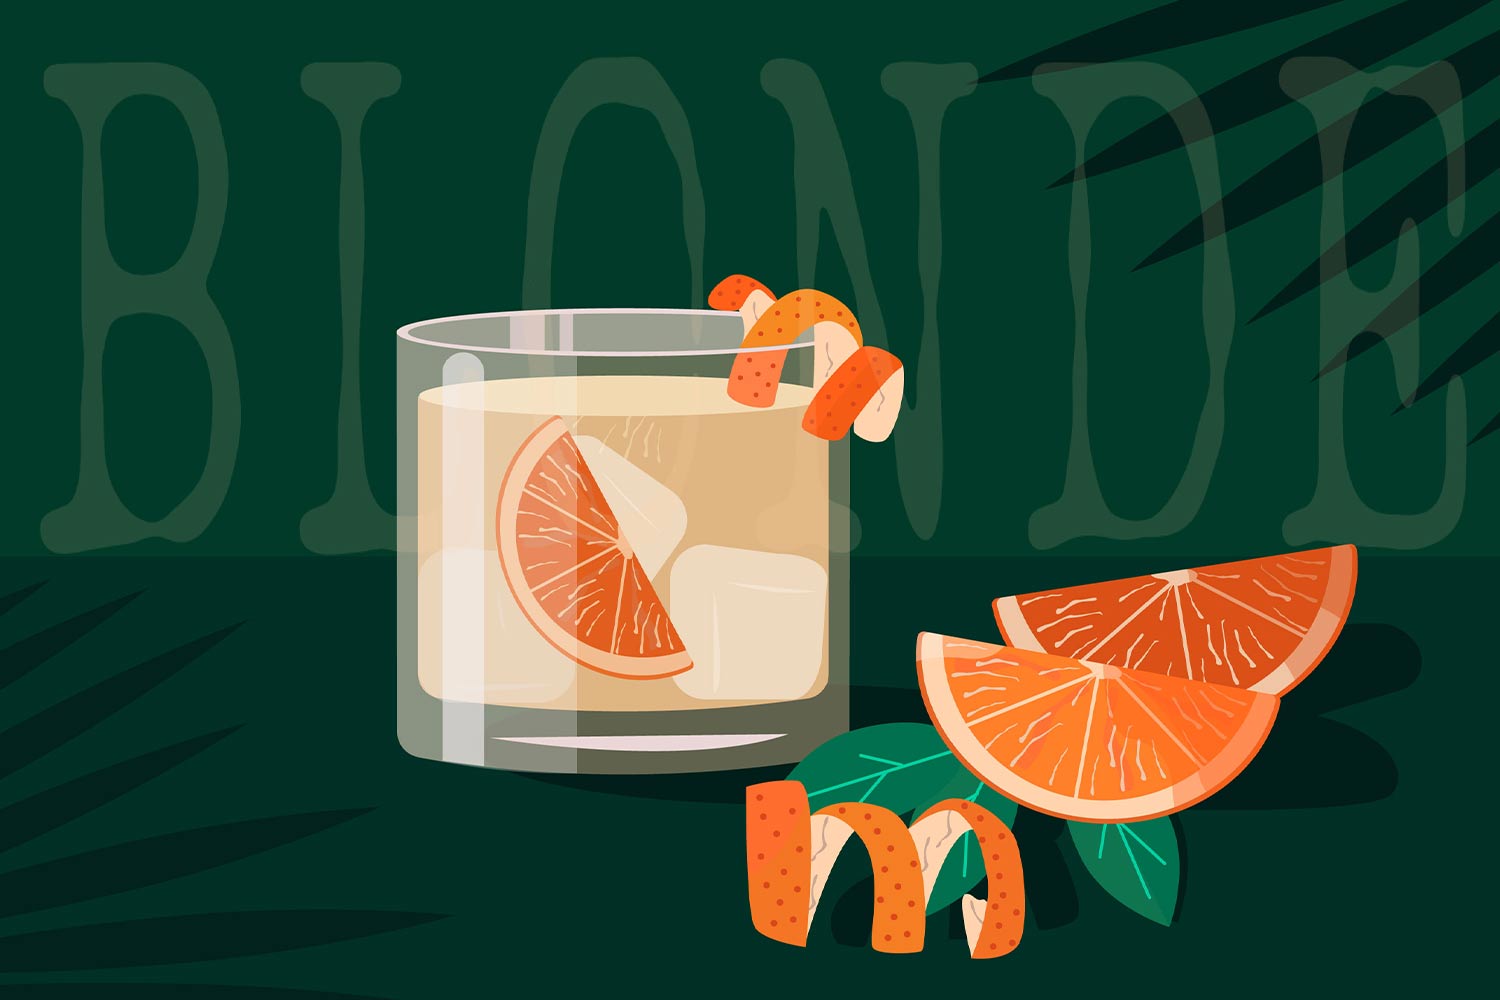 Illustration of a cocktail with oranges on the rocks on a green background